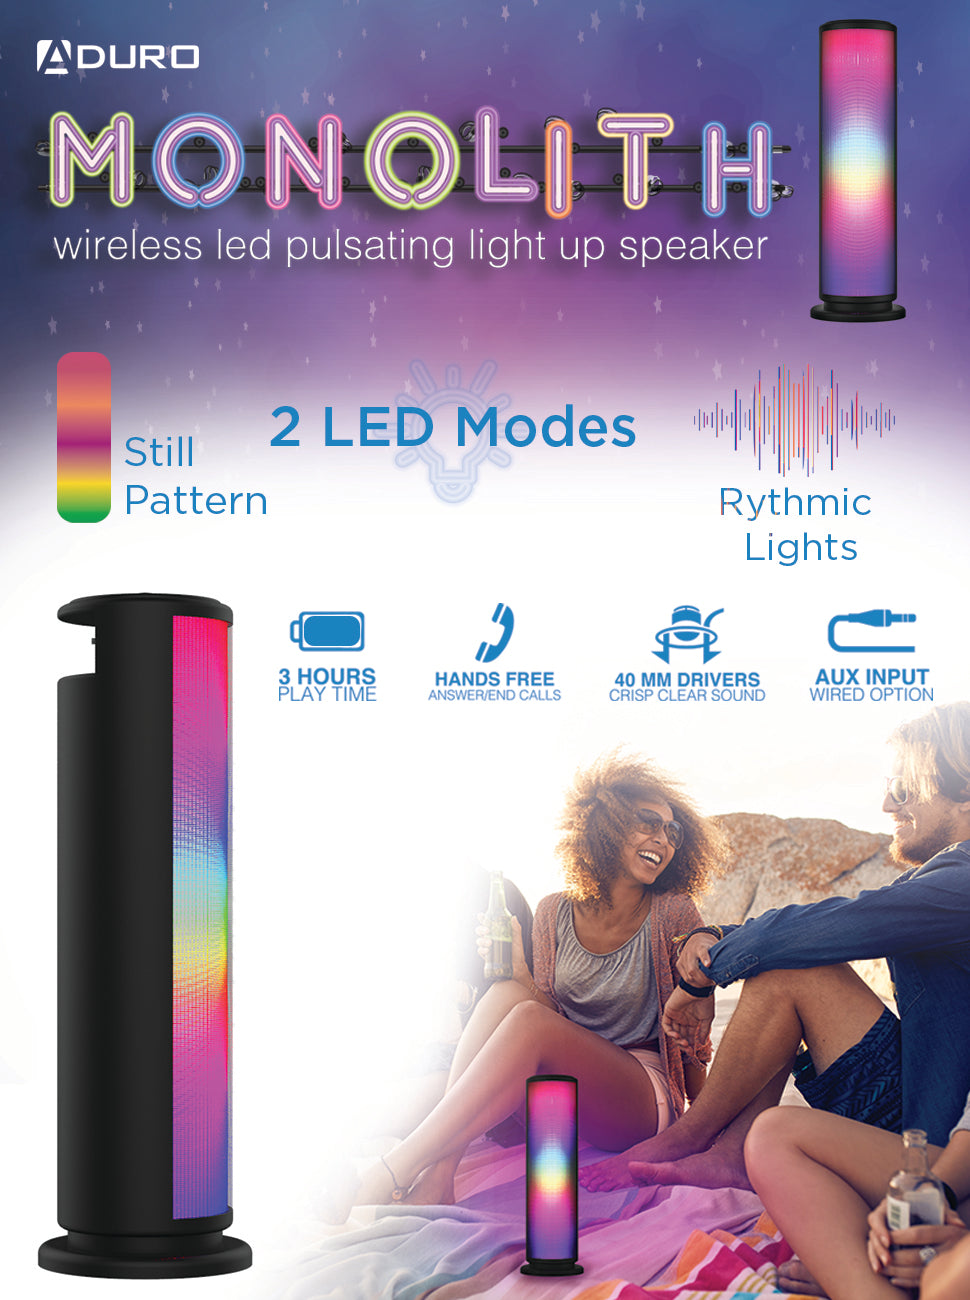 MONOLITH LED TOWER SHAPED PARTY WIRELESS SPEAKER